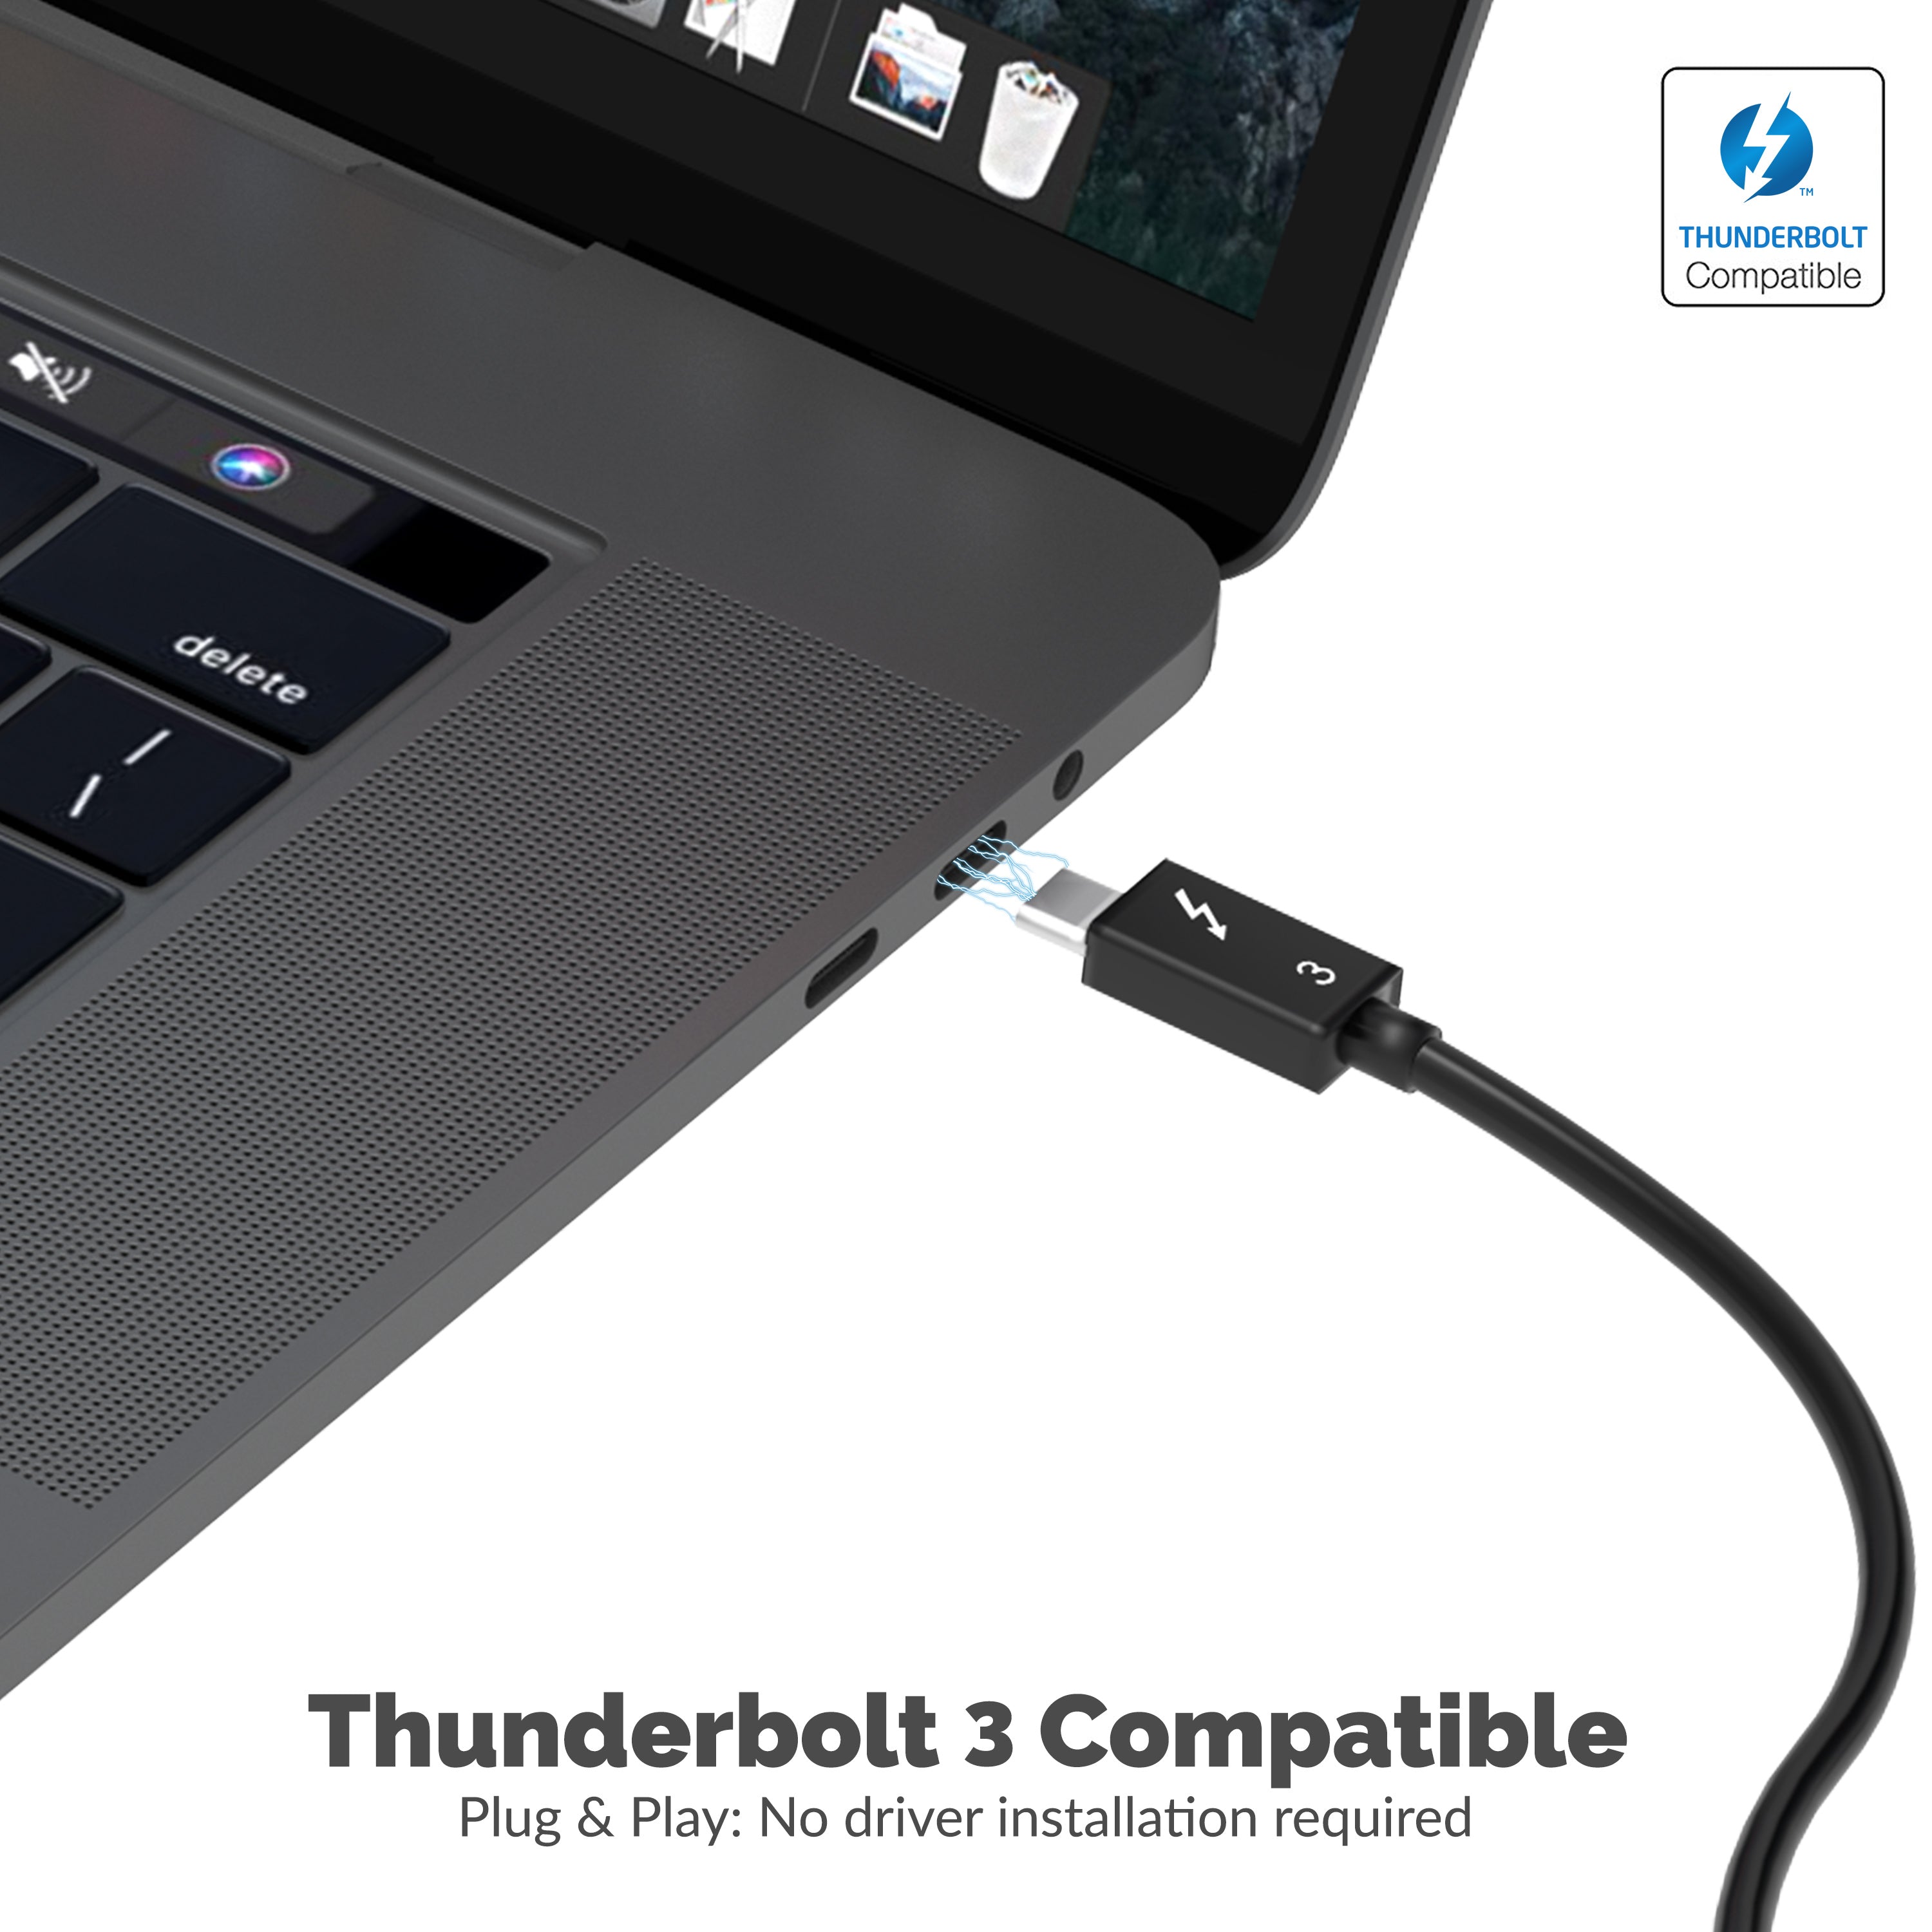 Thunderbolt 3 Docking Station with Power Delivery up to 60W